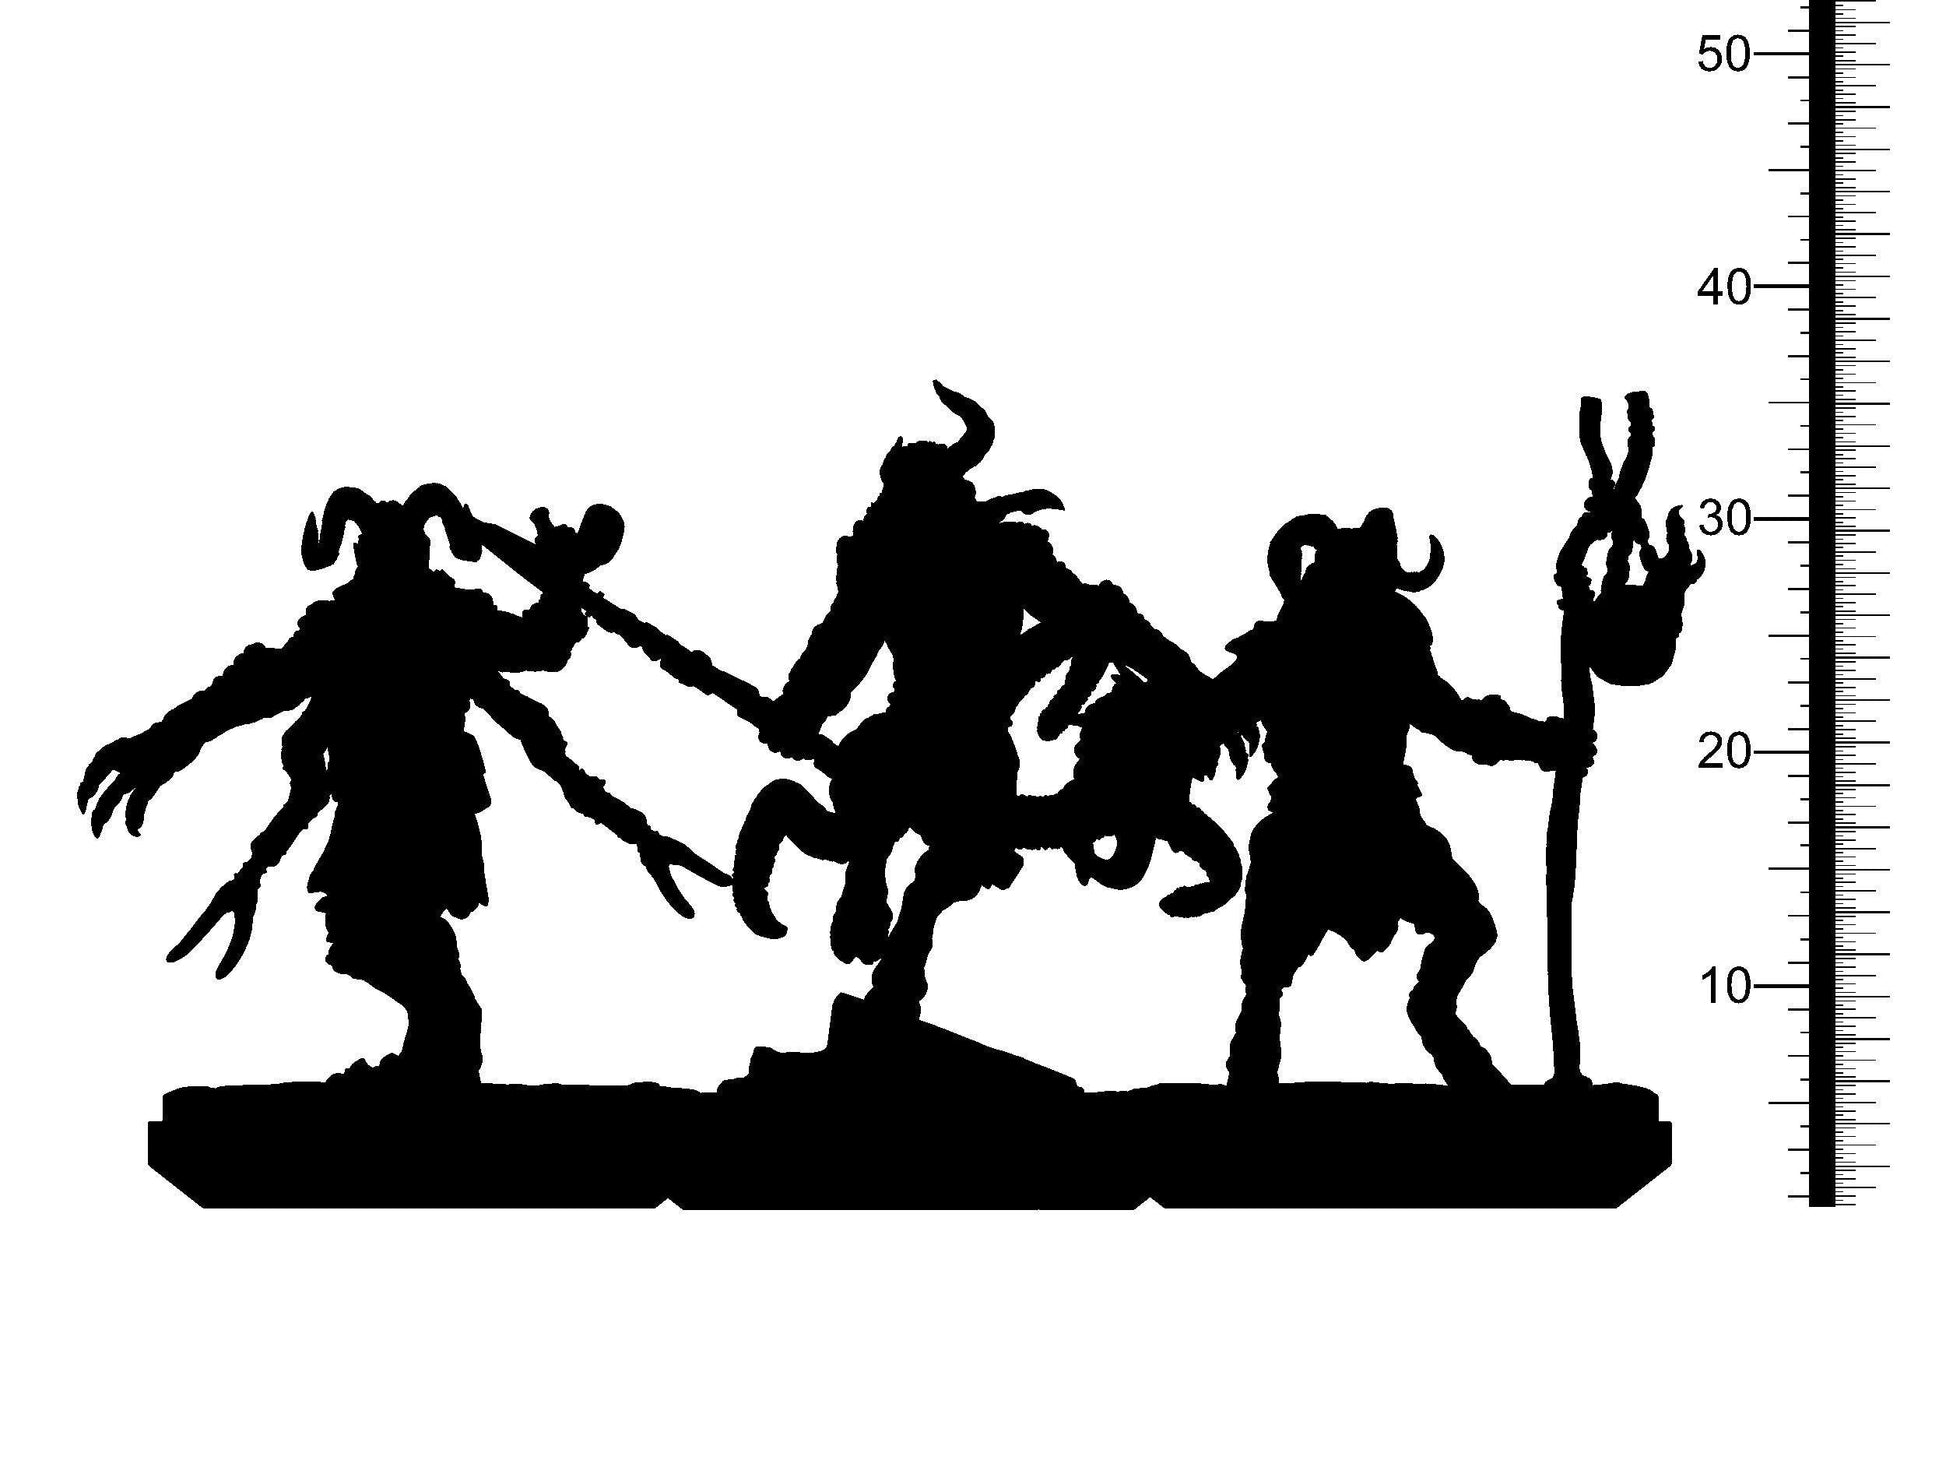 Cursed Satyrs Miniatures | Clay Cyanide | Wrath of God | 3 Types | Tabletop Gaming | DnD Miniature | Dungeons and Dragons,DnD 5e - Plague Miniatures shop for DnD Miniatures